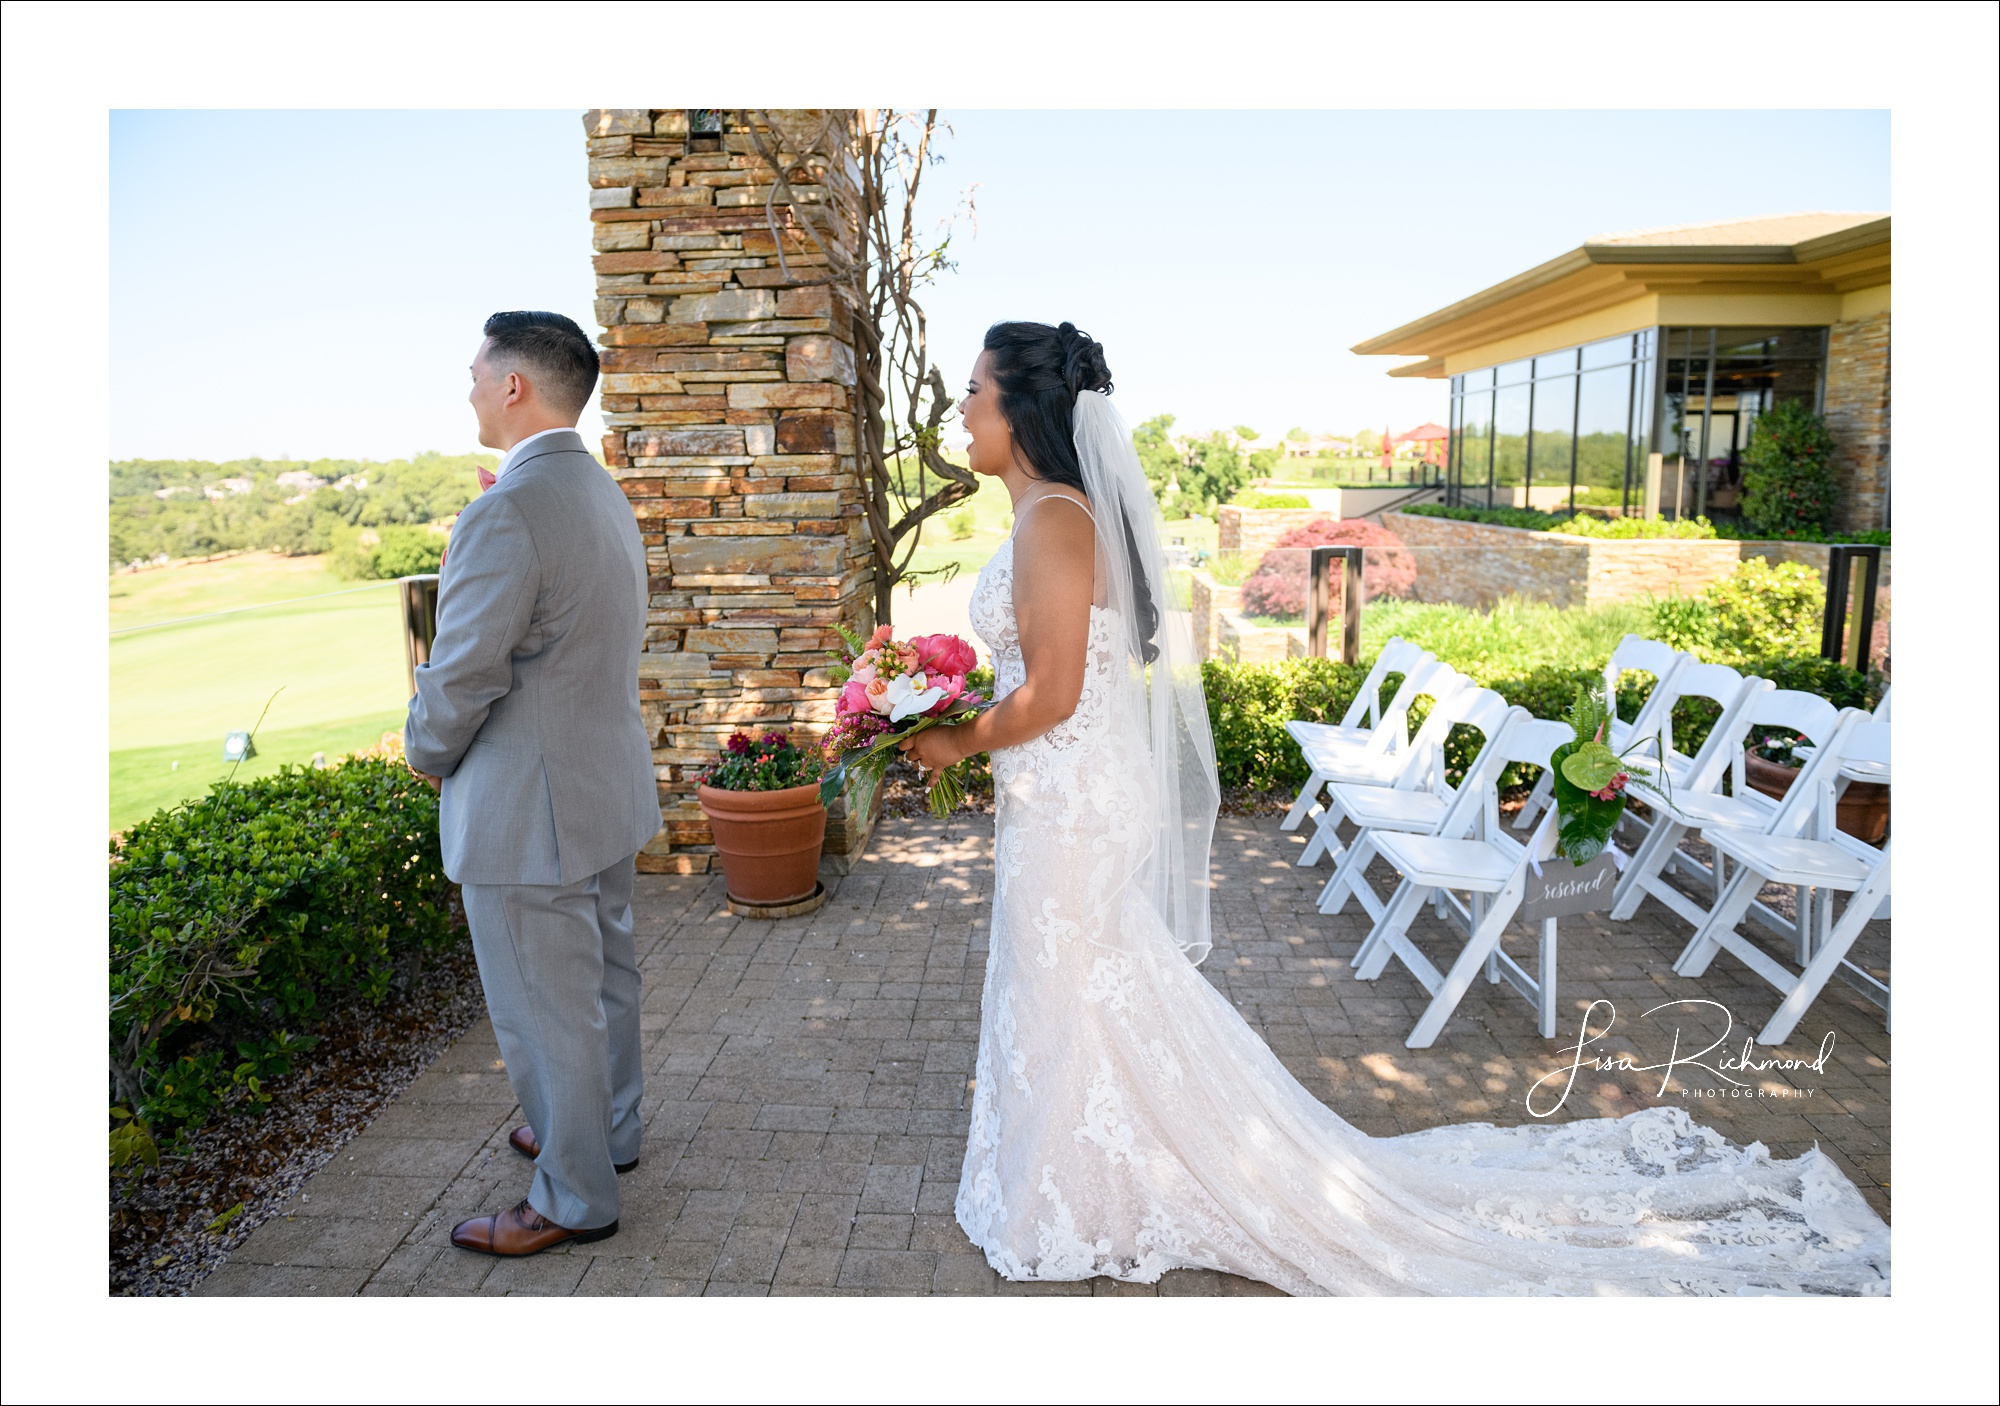 Anja and Nick celebrate their wedding day at Serrano Country Club